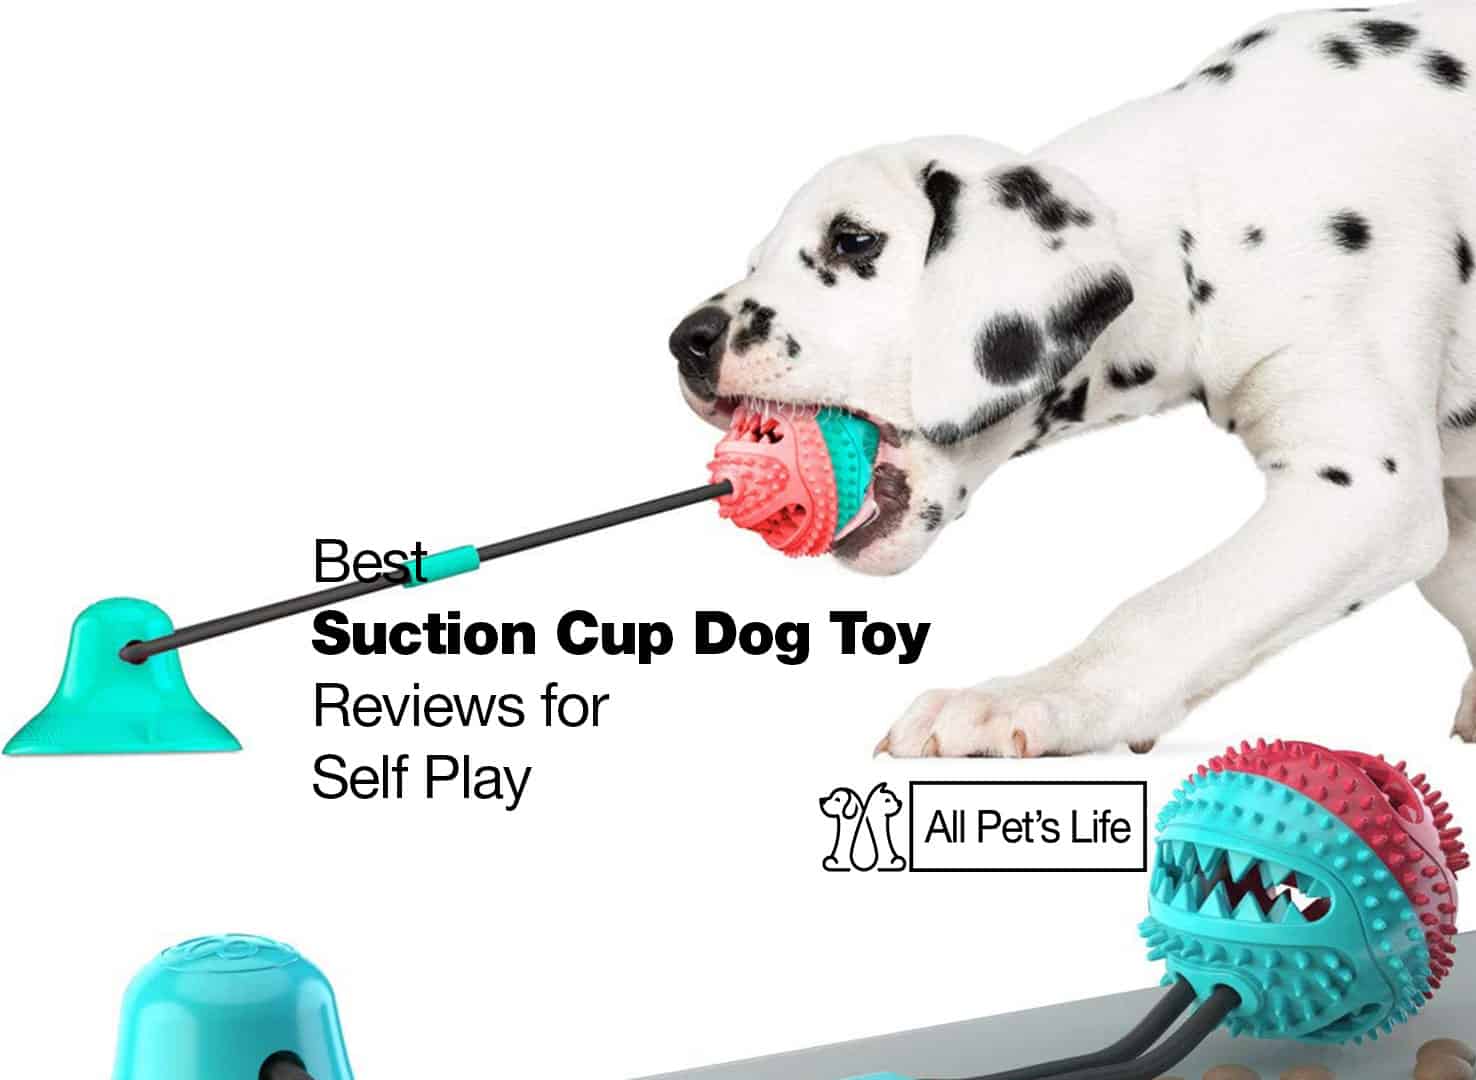 https://allpetslife.com/wp-content/uploads/suction-cup-dog-toy-with-ball.jpg